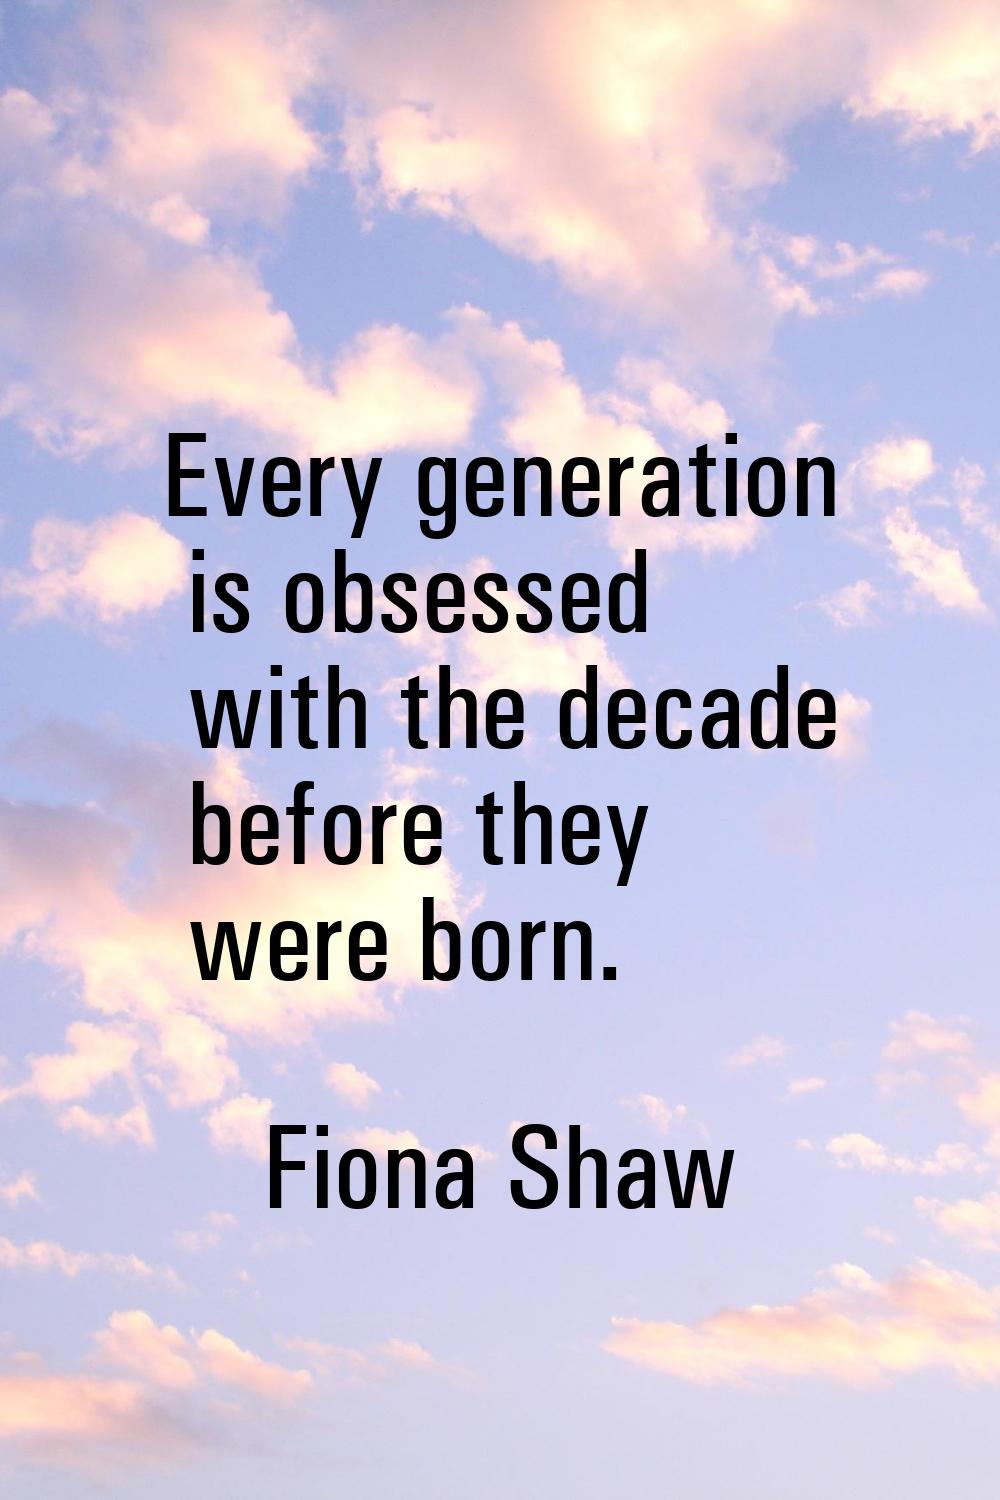 Every generation is obsessed with the decade before they were born.